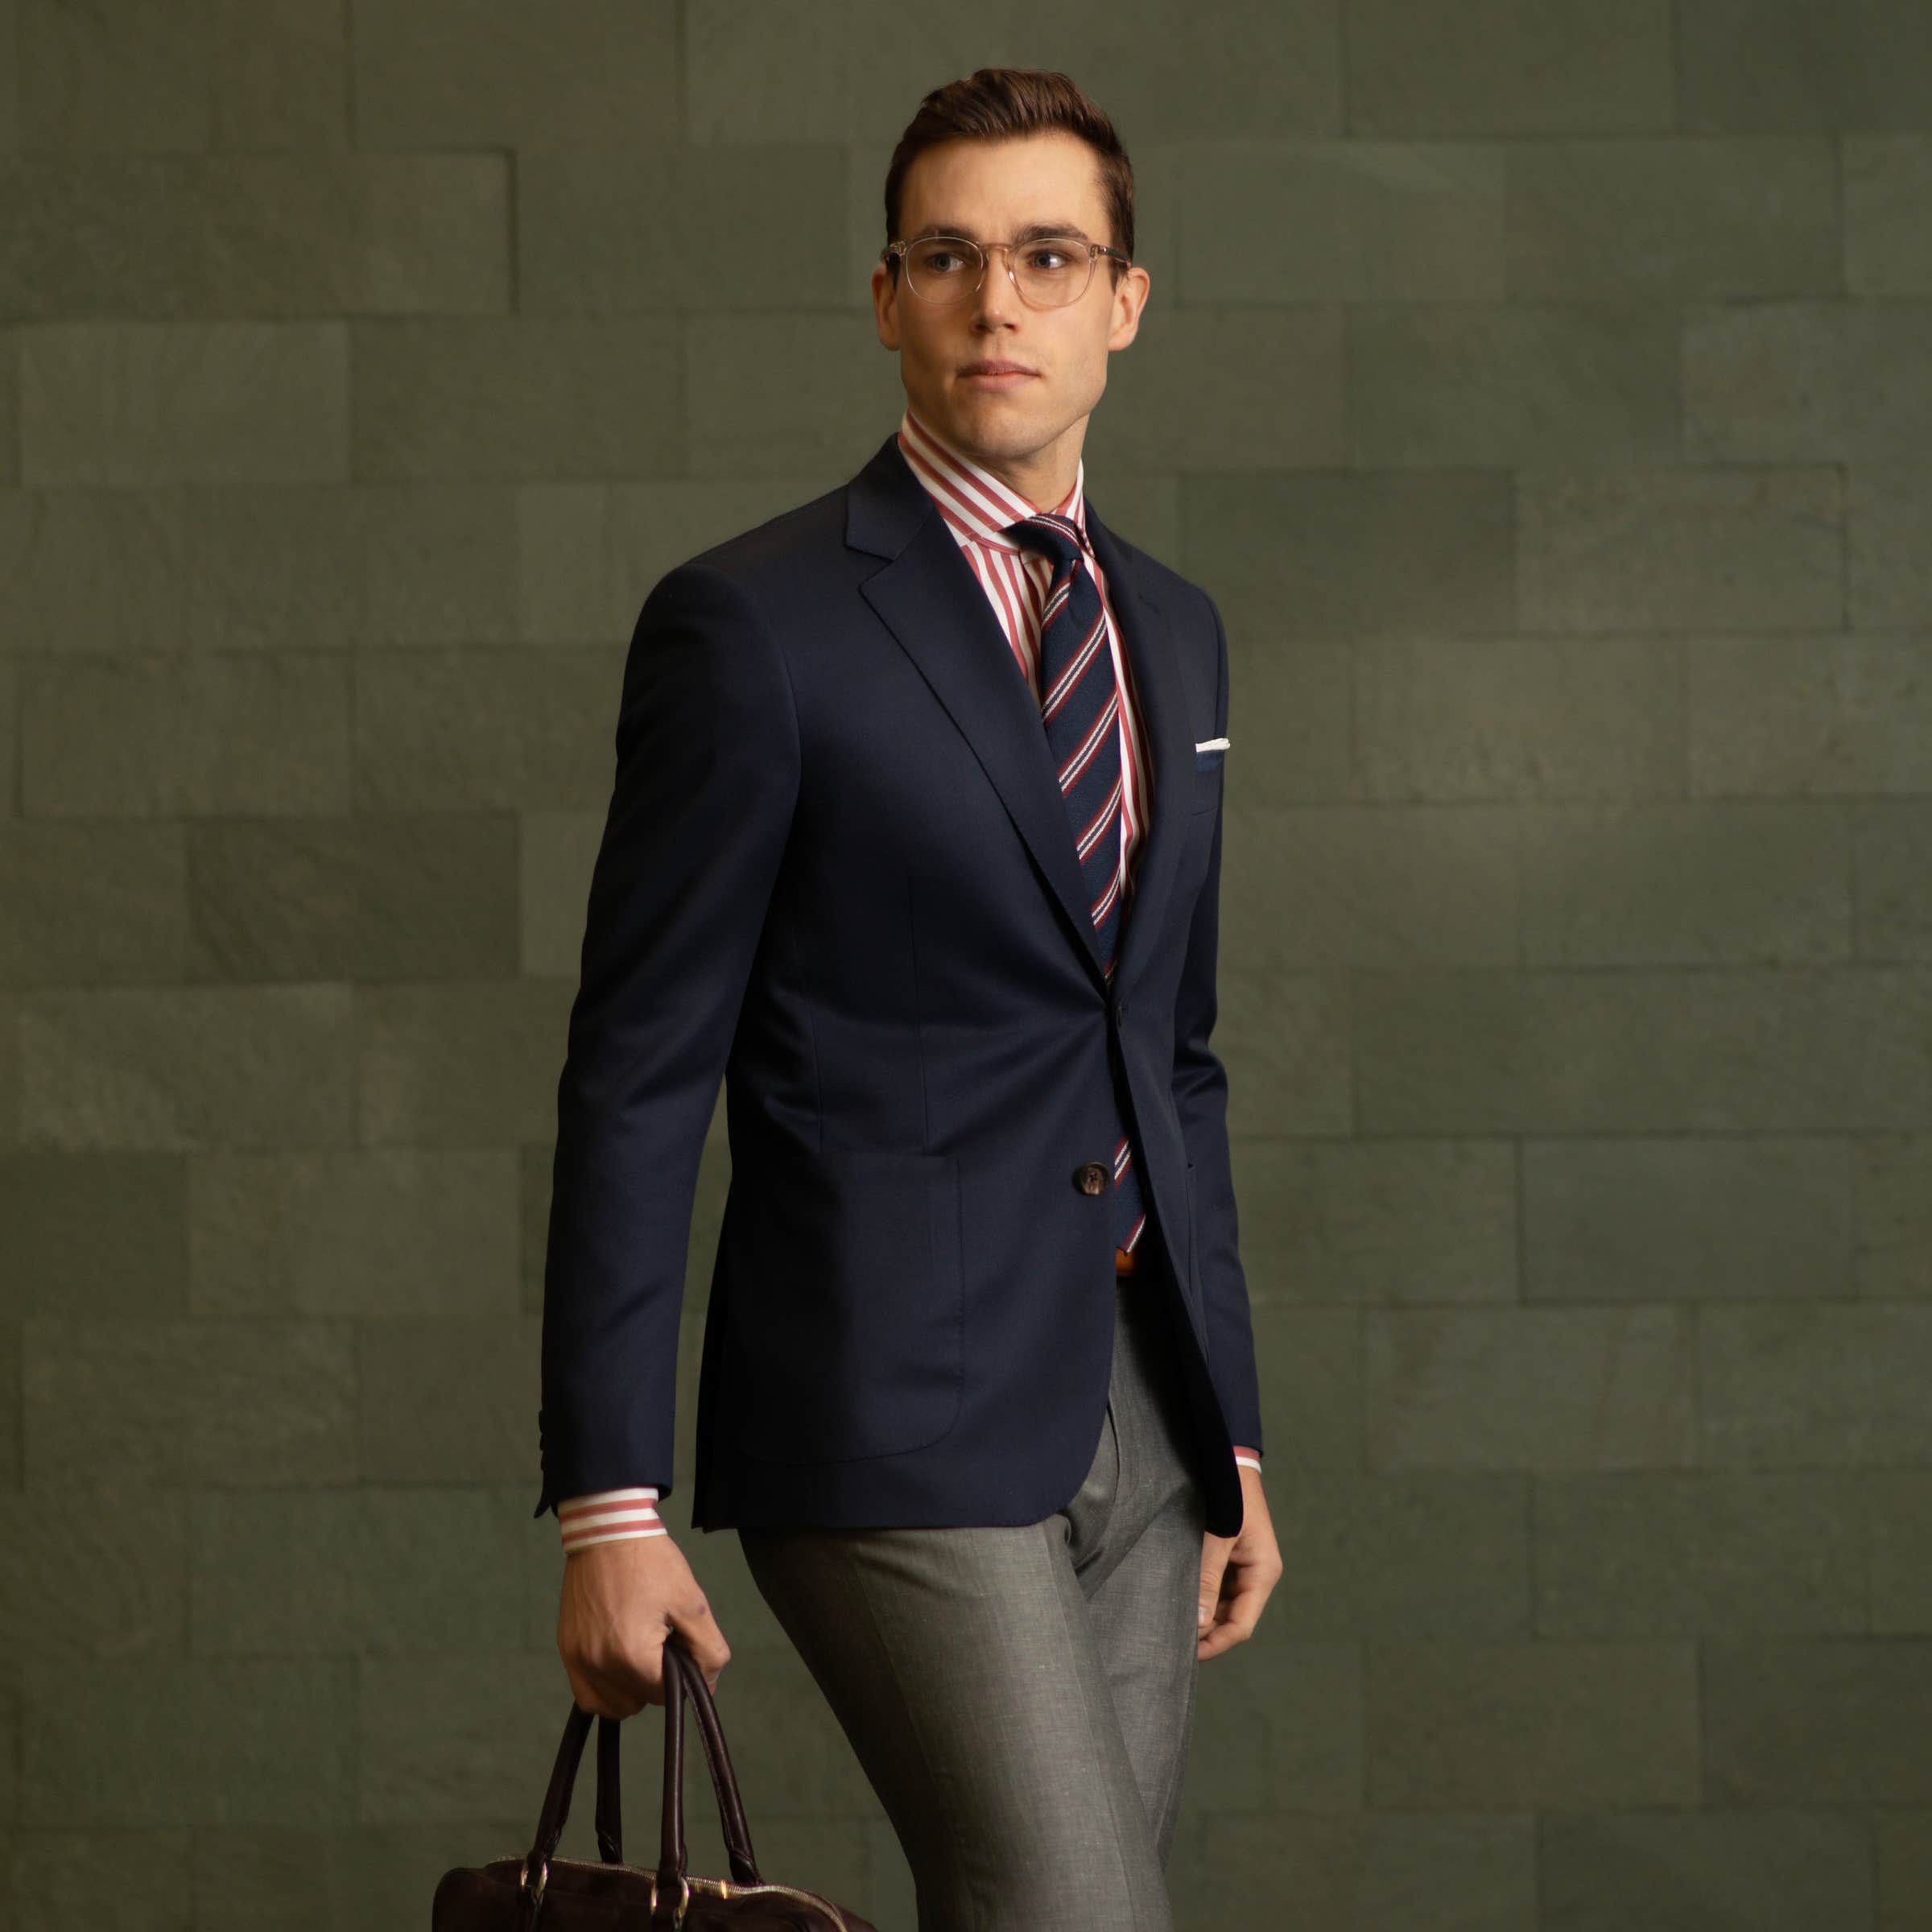 How to Wear the Preppy Ivy League Style